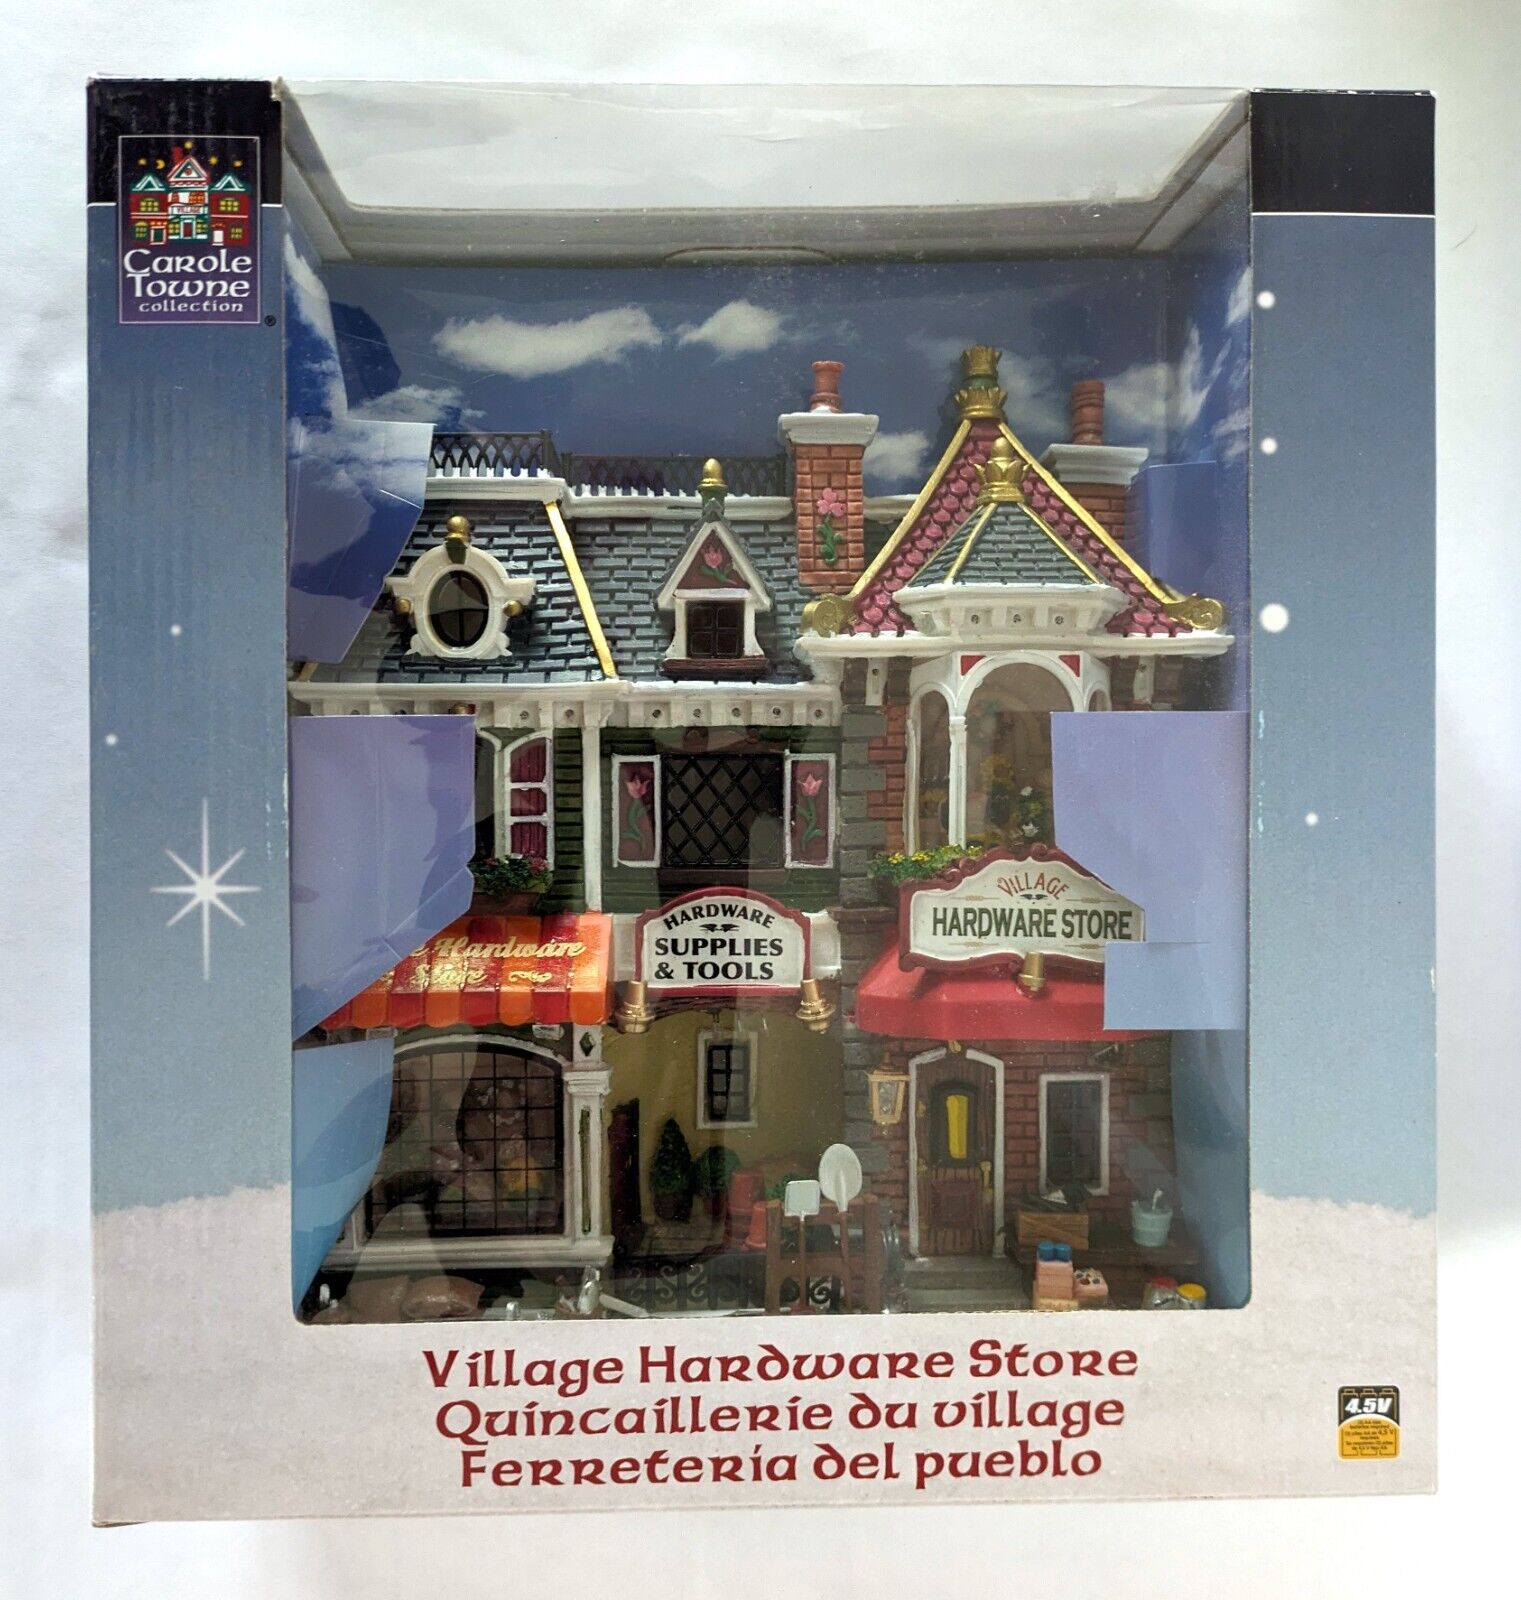 2009 Lemax Carole Towne Village Hardware Store Building Looks New in Open Box